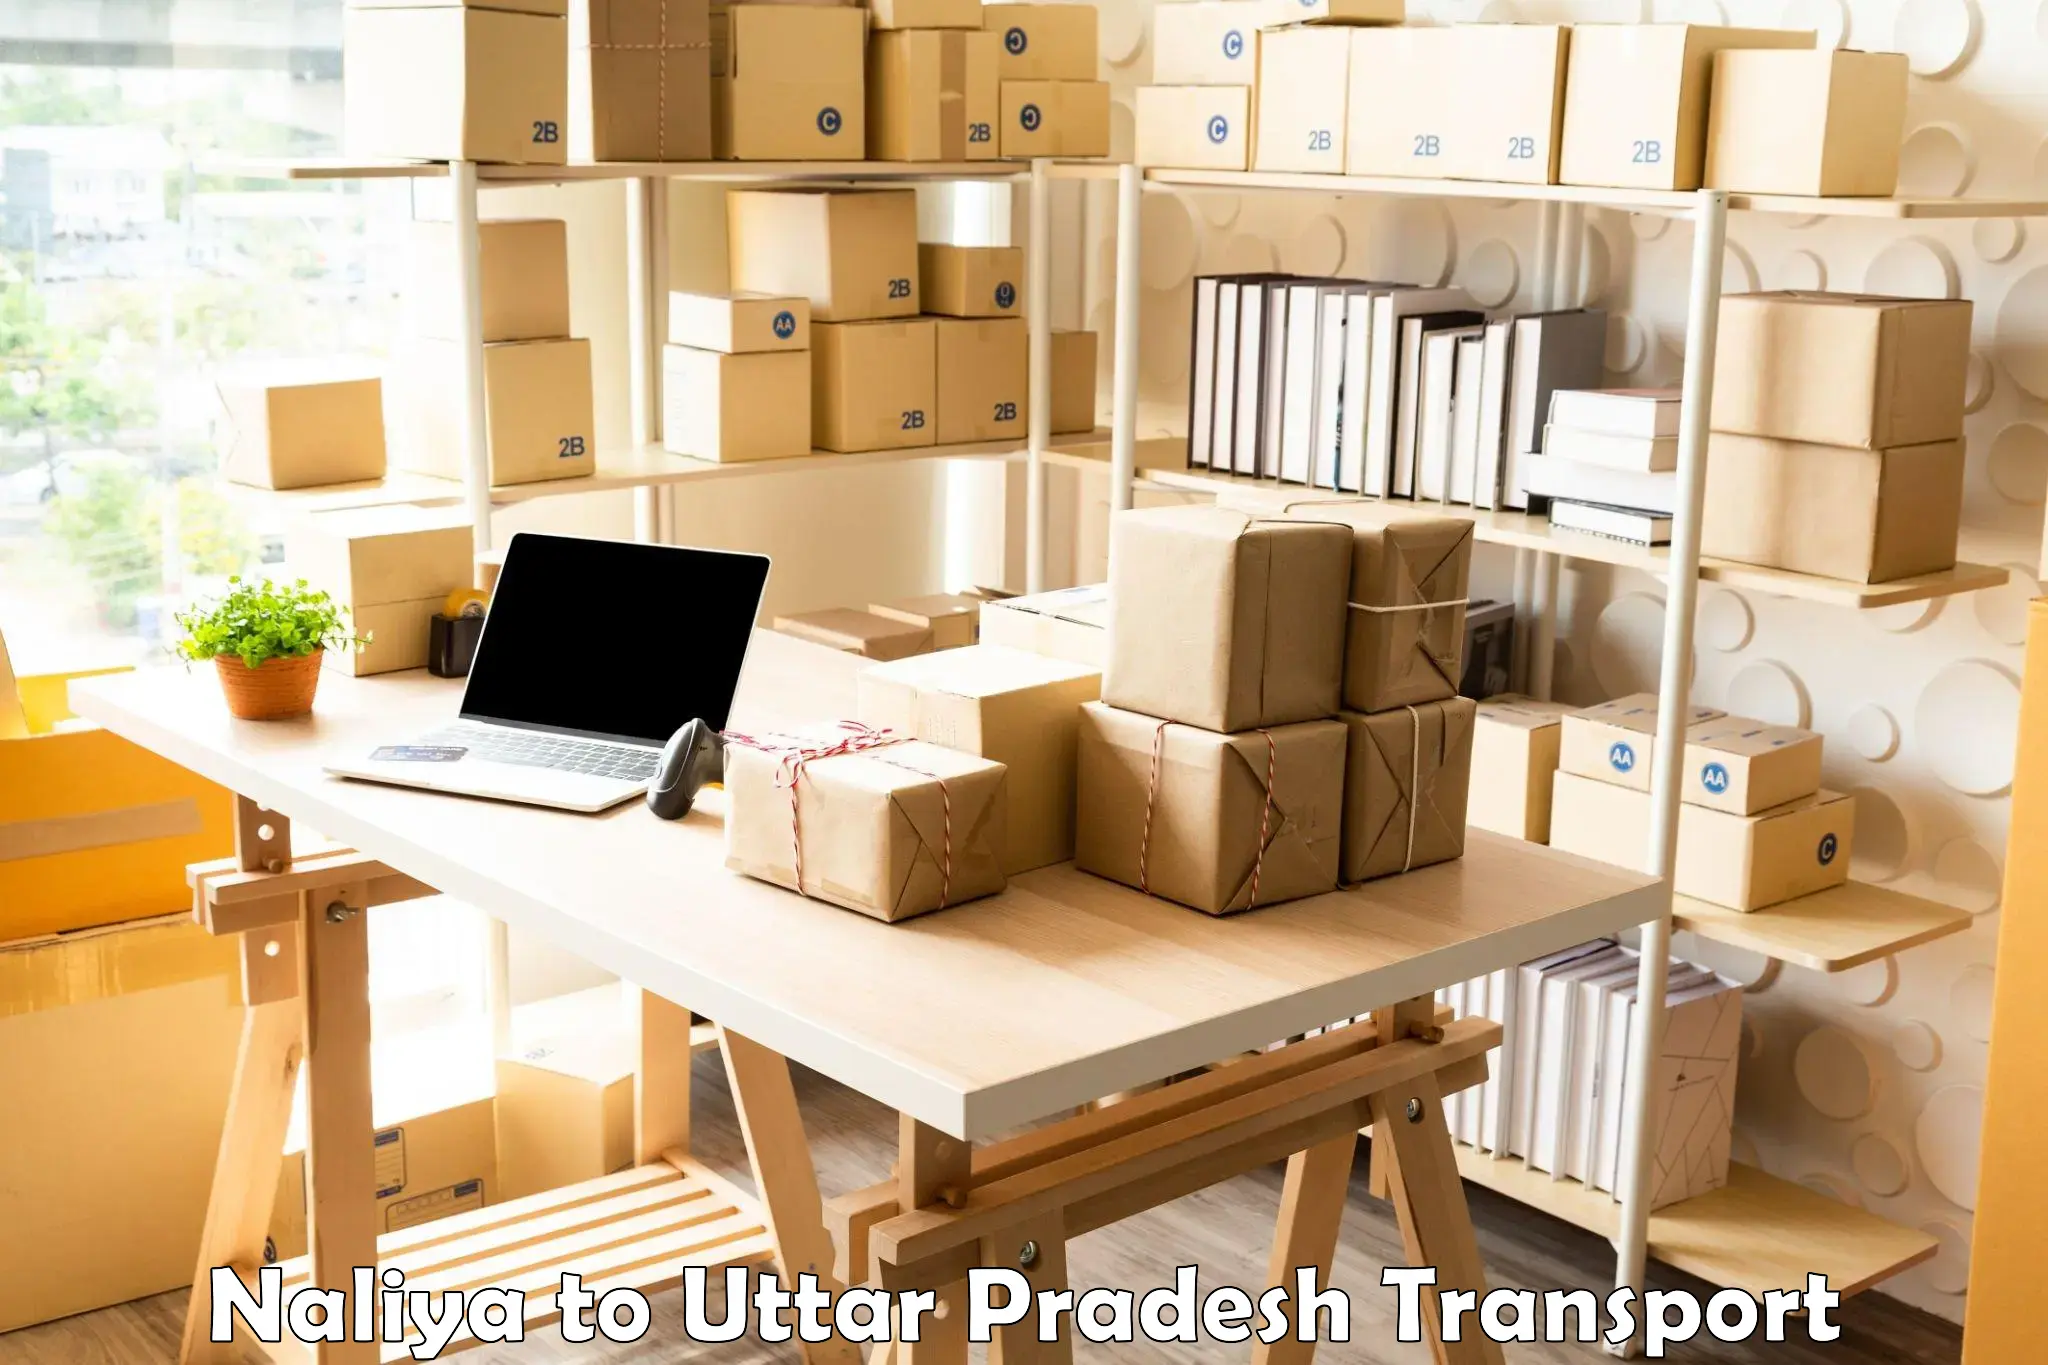 Air freight transport services in Naliya to Kanpur